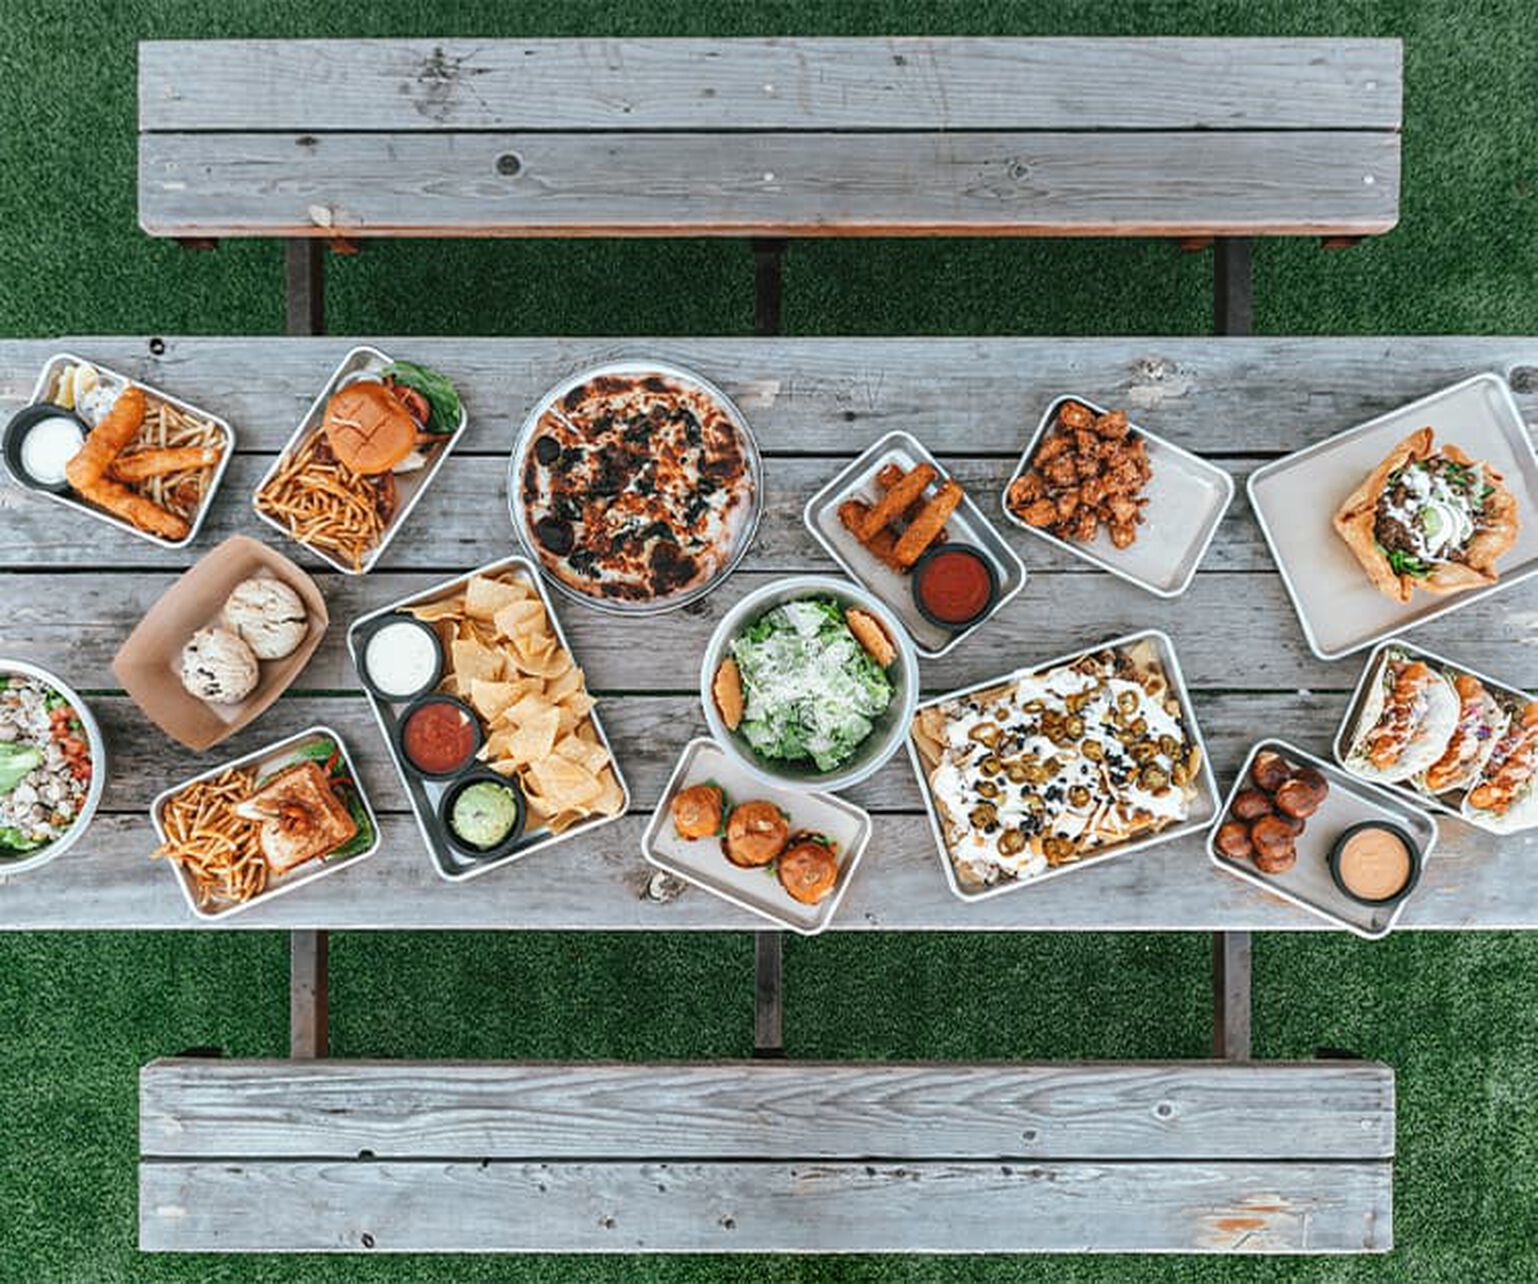 Snacks and drinks on a picnic table